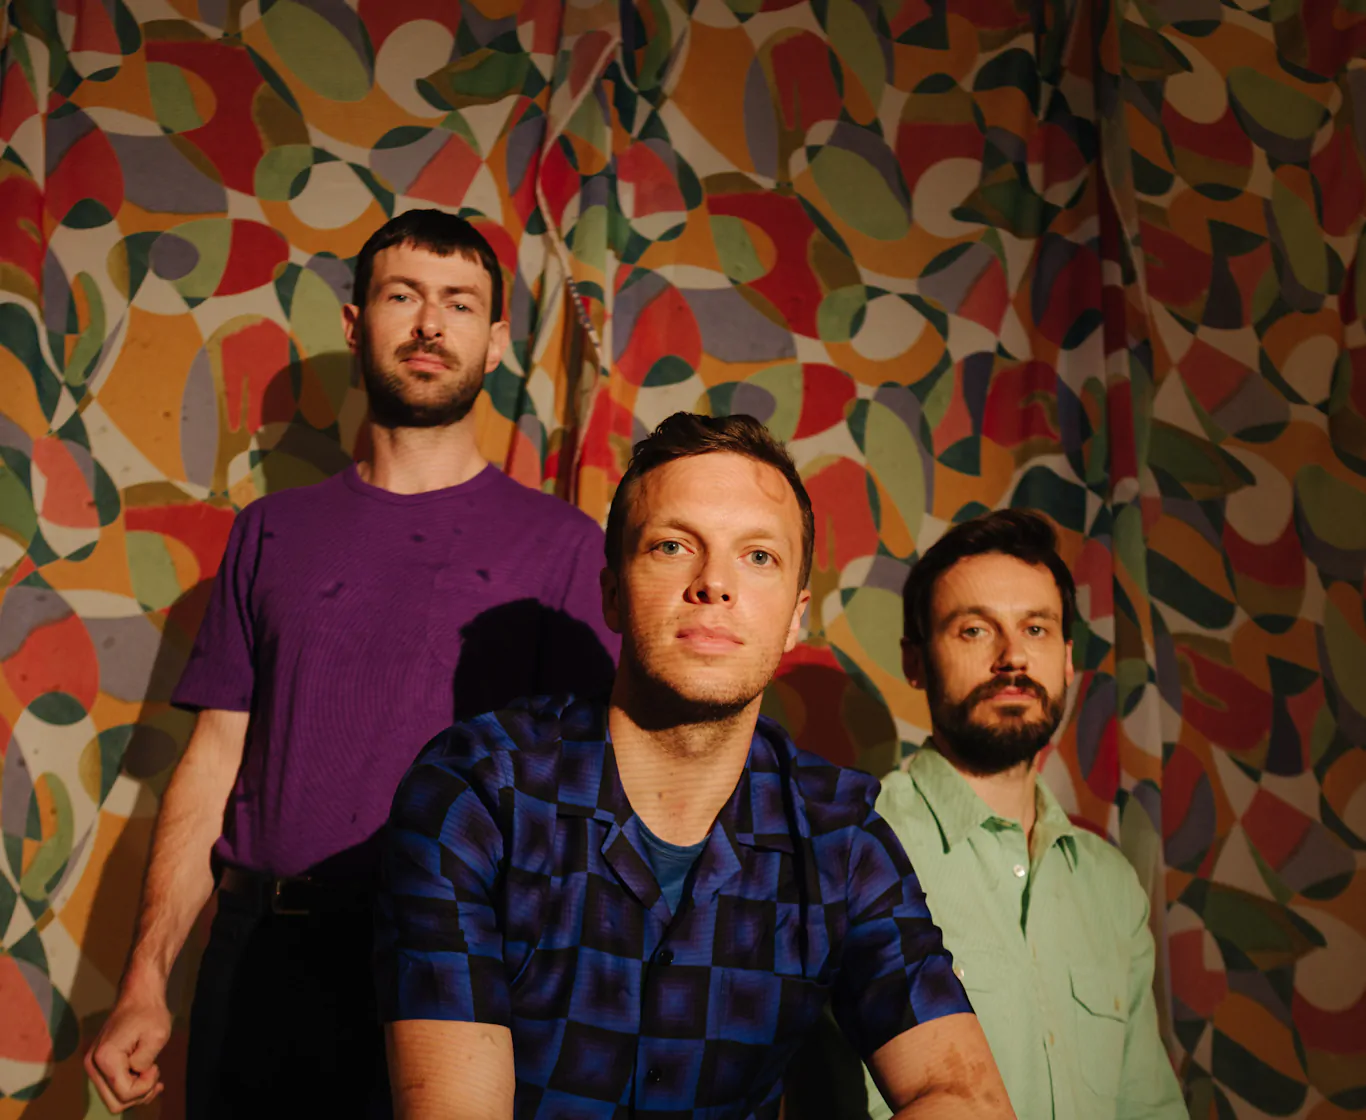 FRIENDLY FIRES announce two new 15th year anniversary shows of classic debut album ‘FRIENDLY FIRES’